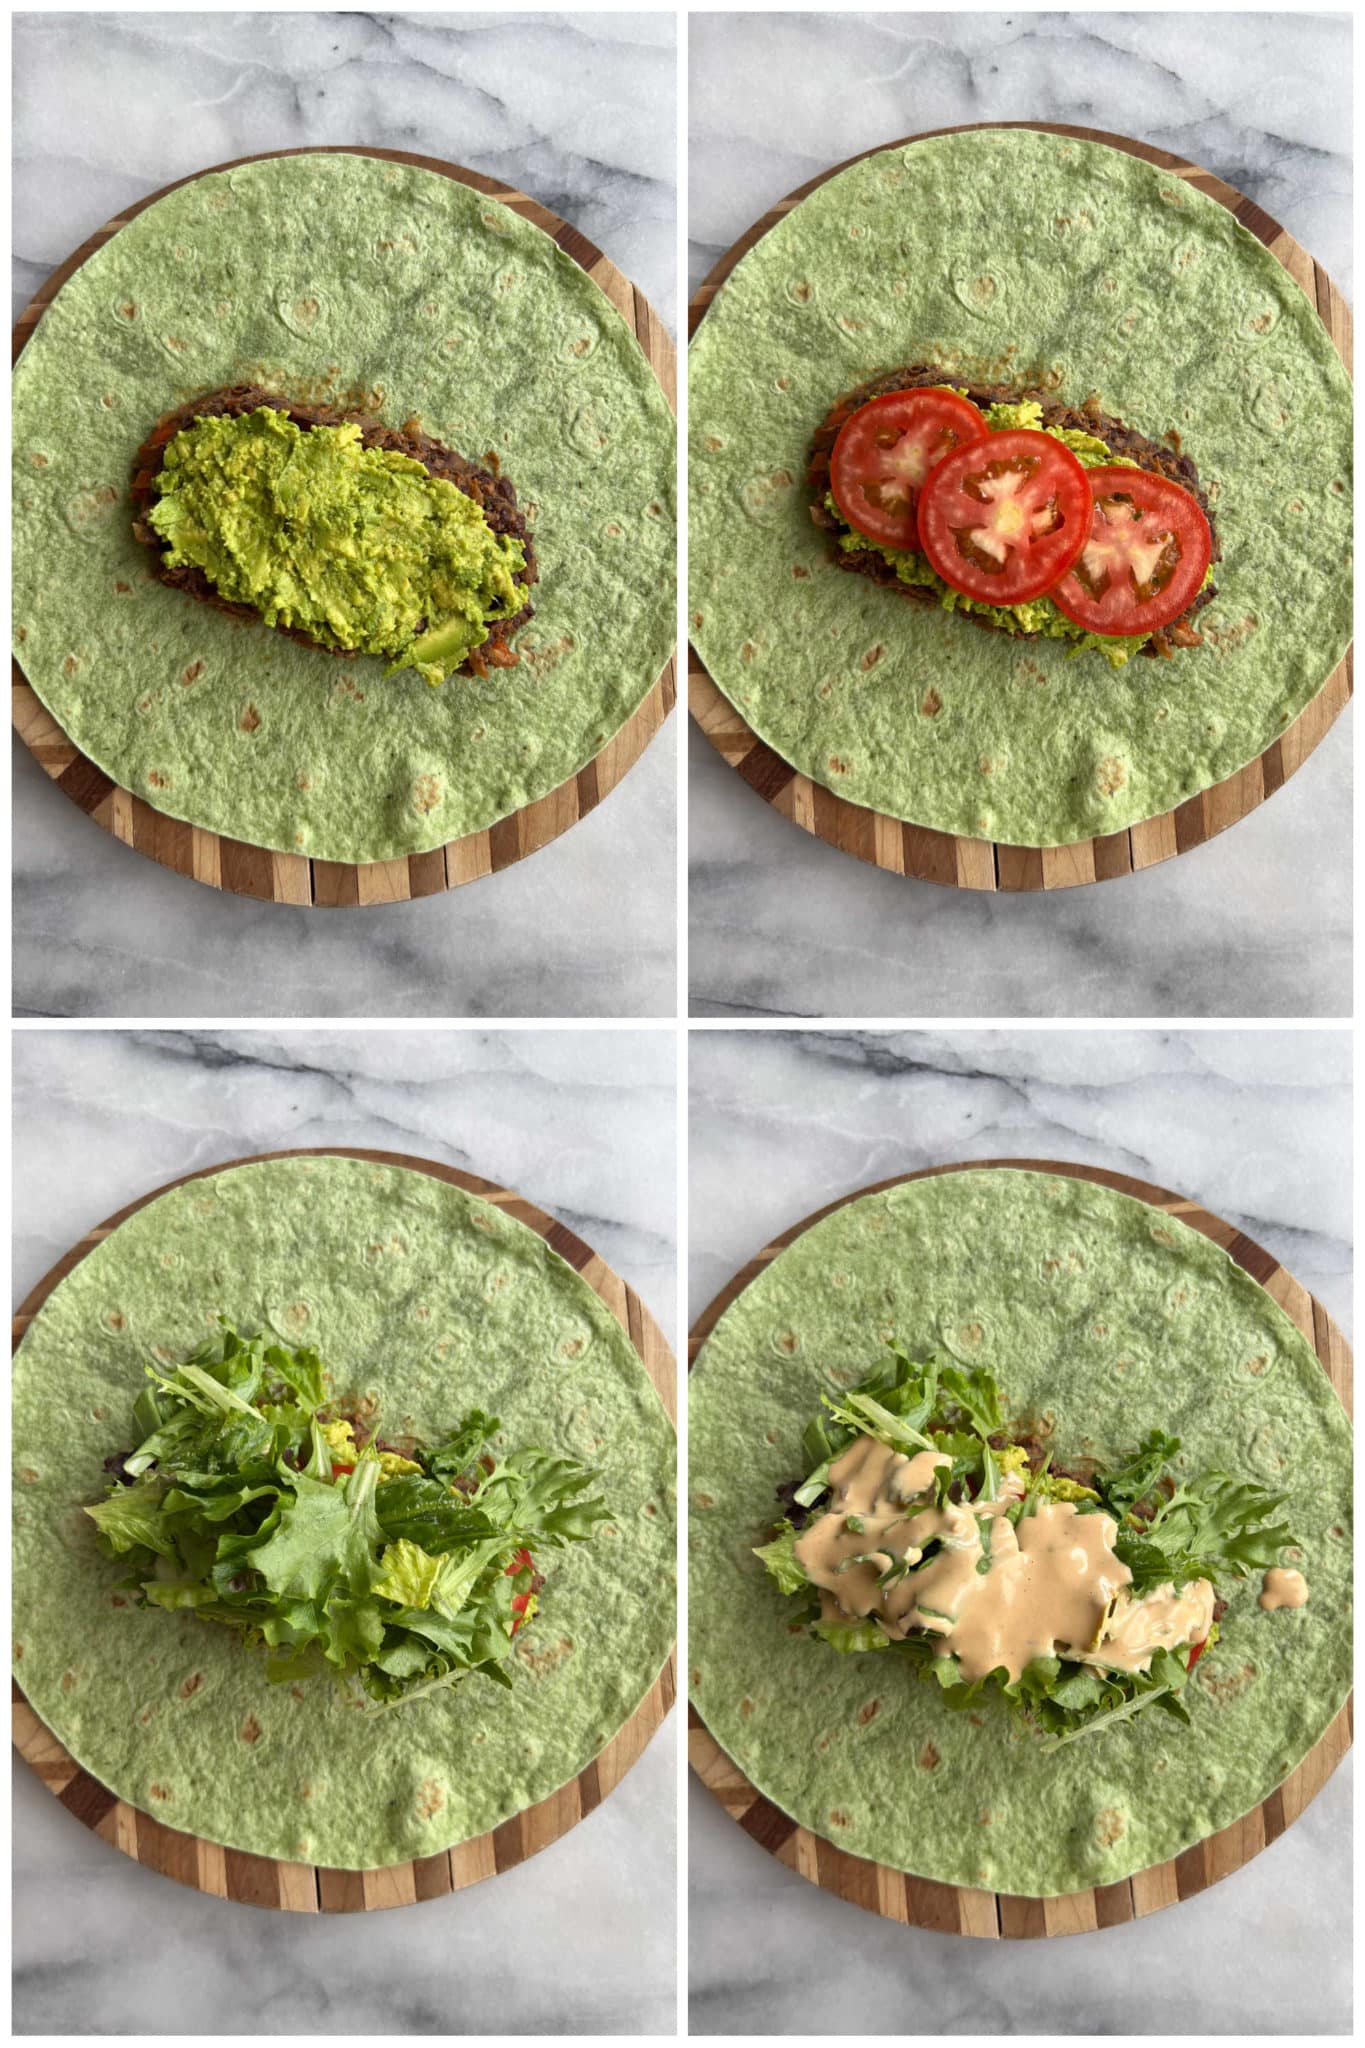 step by step photos of someone making a black bean wrap with avocado, tomato and lettuce